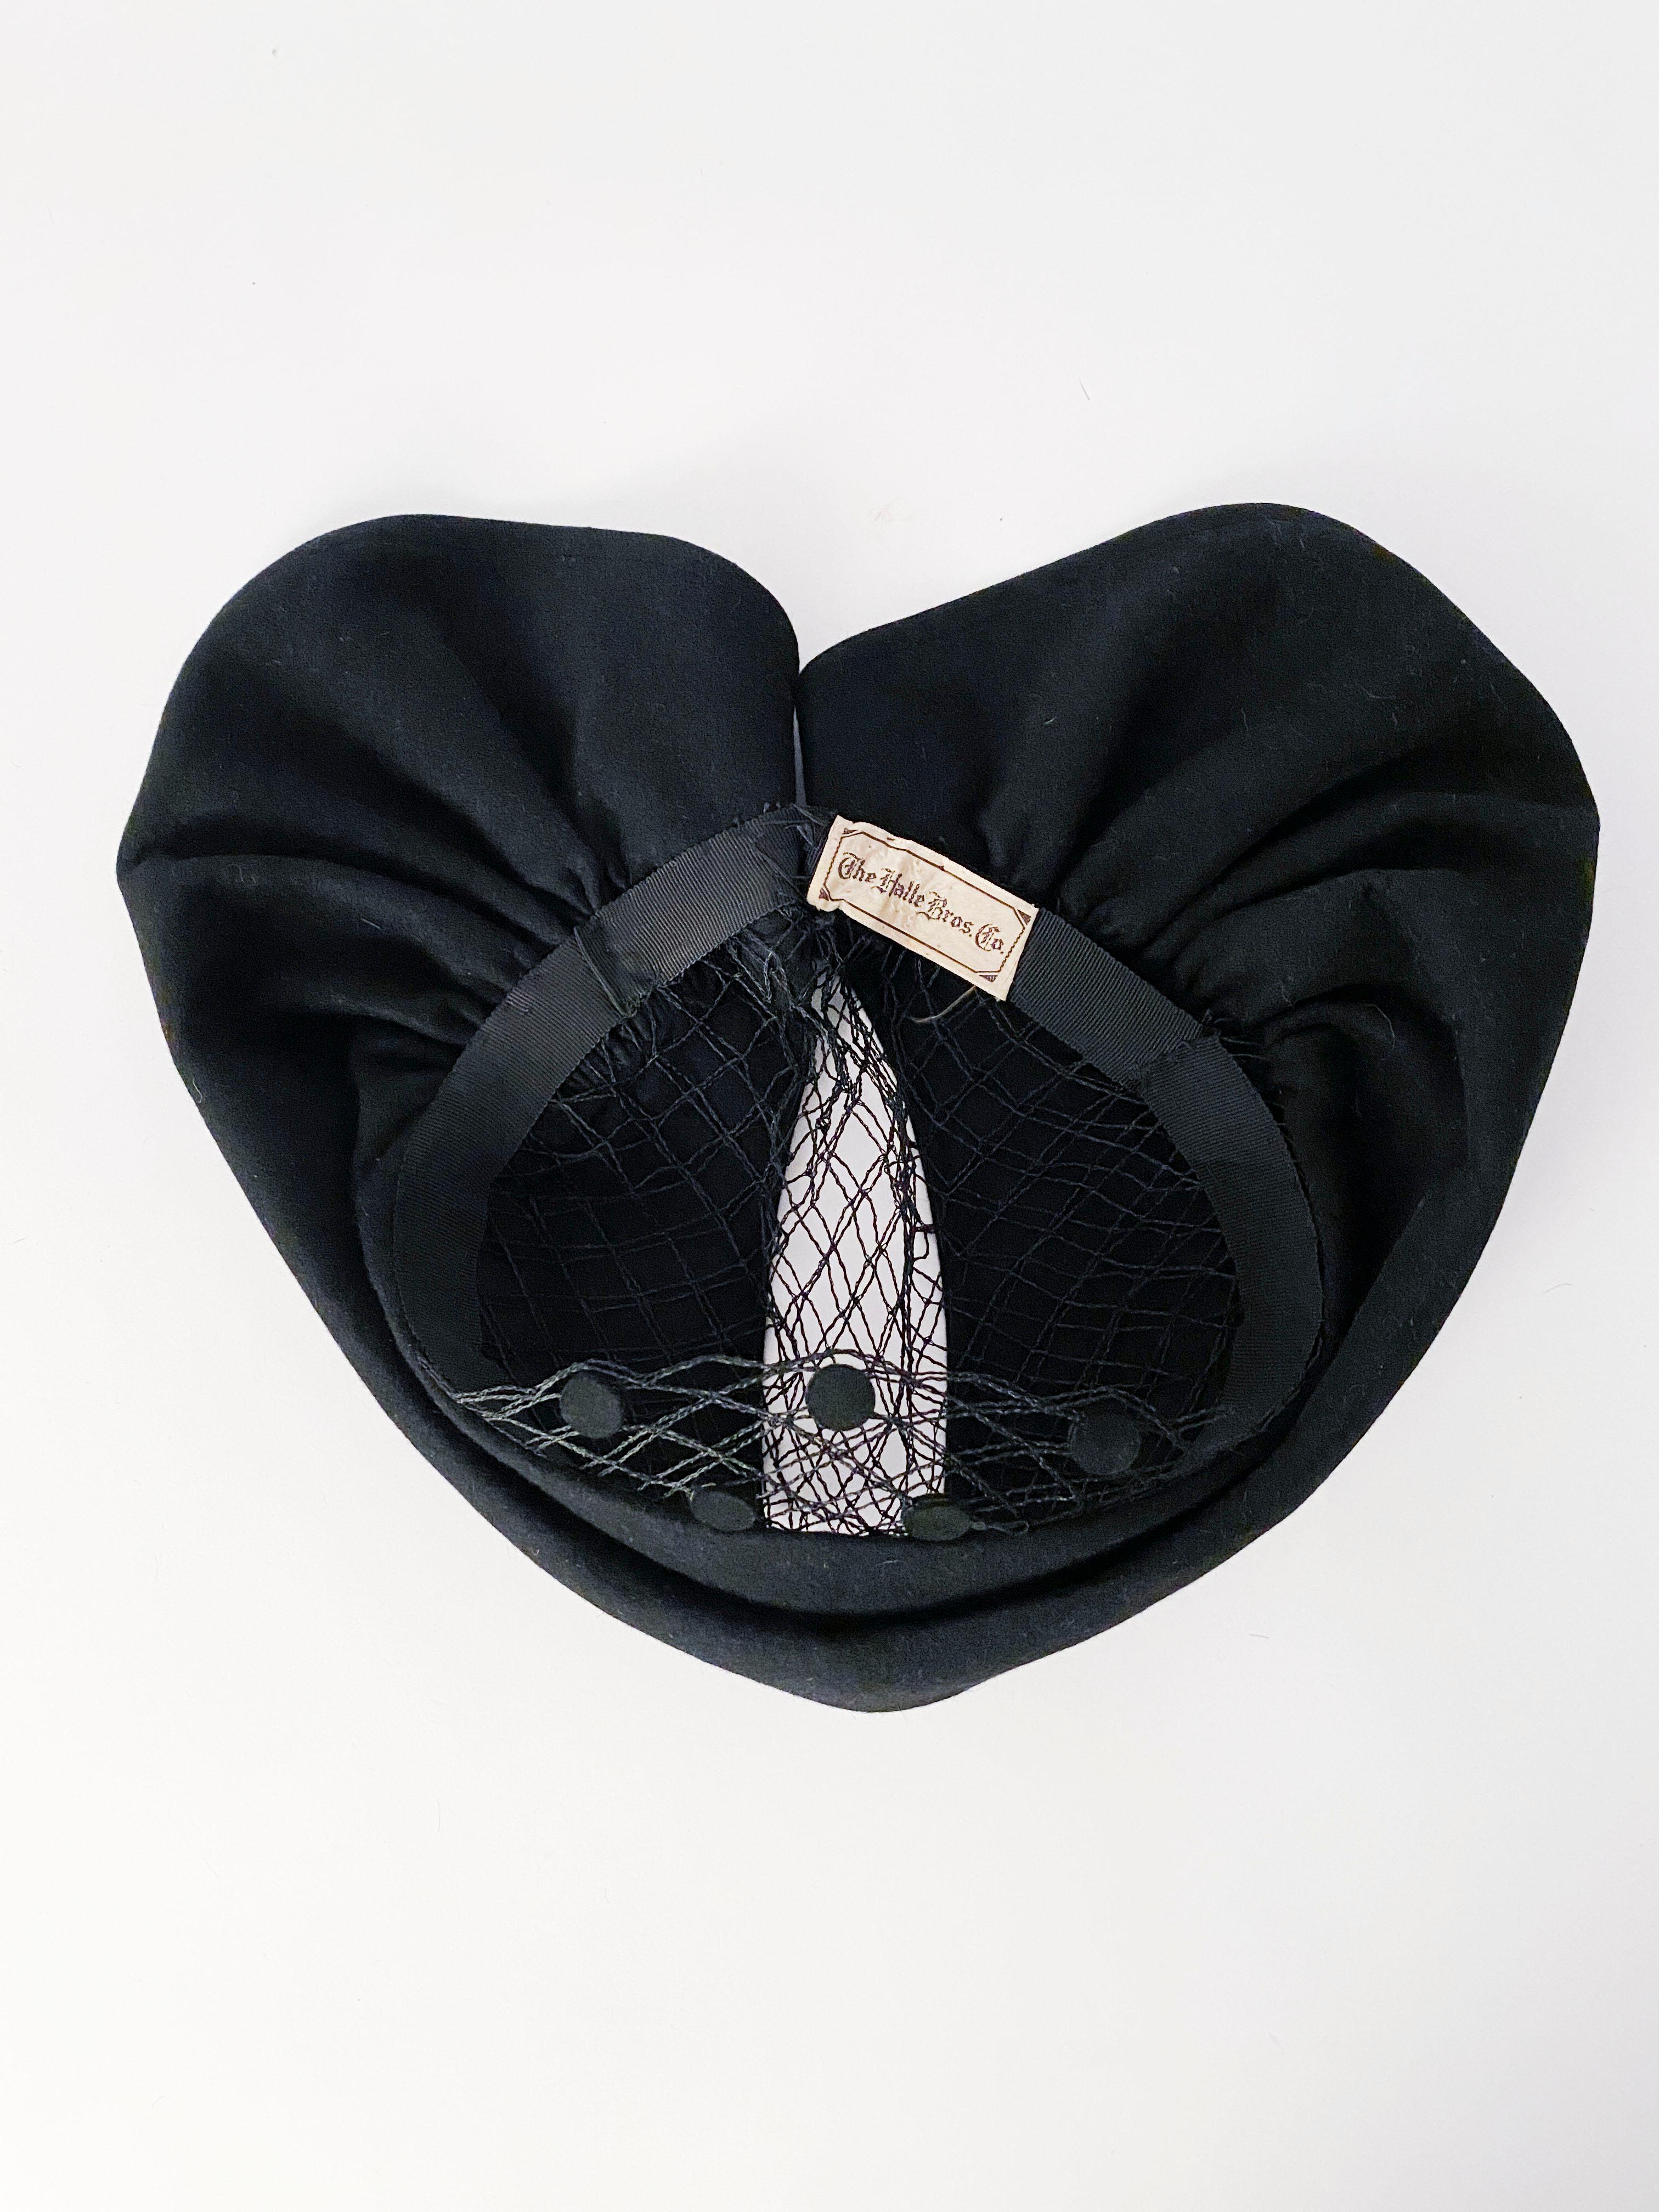 1930s Black Felt Hat with Netting and Back Details 2